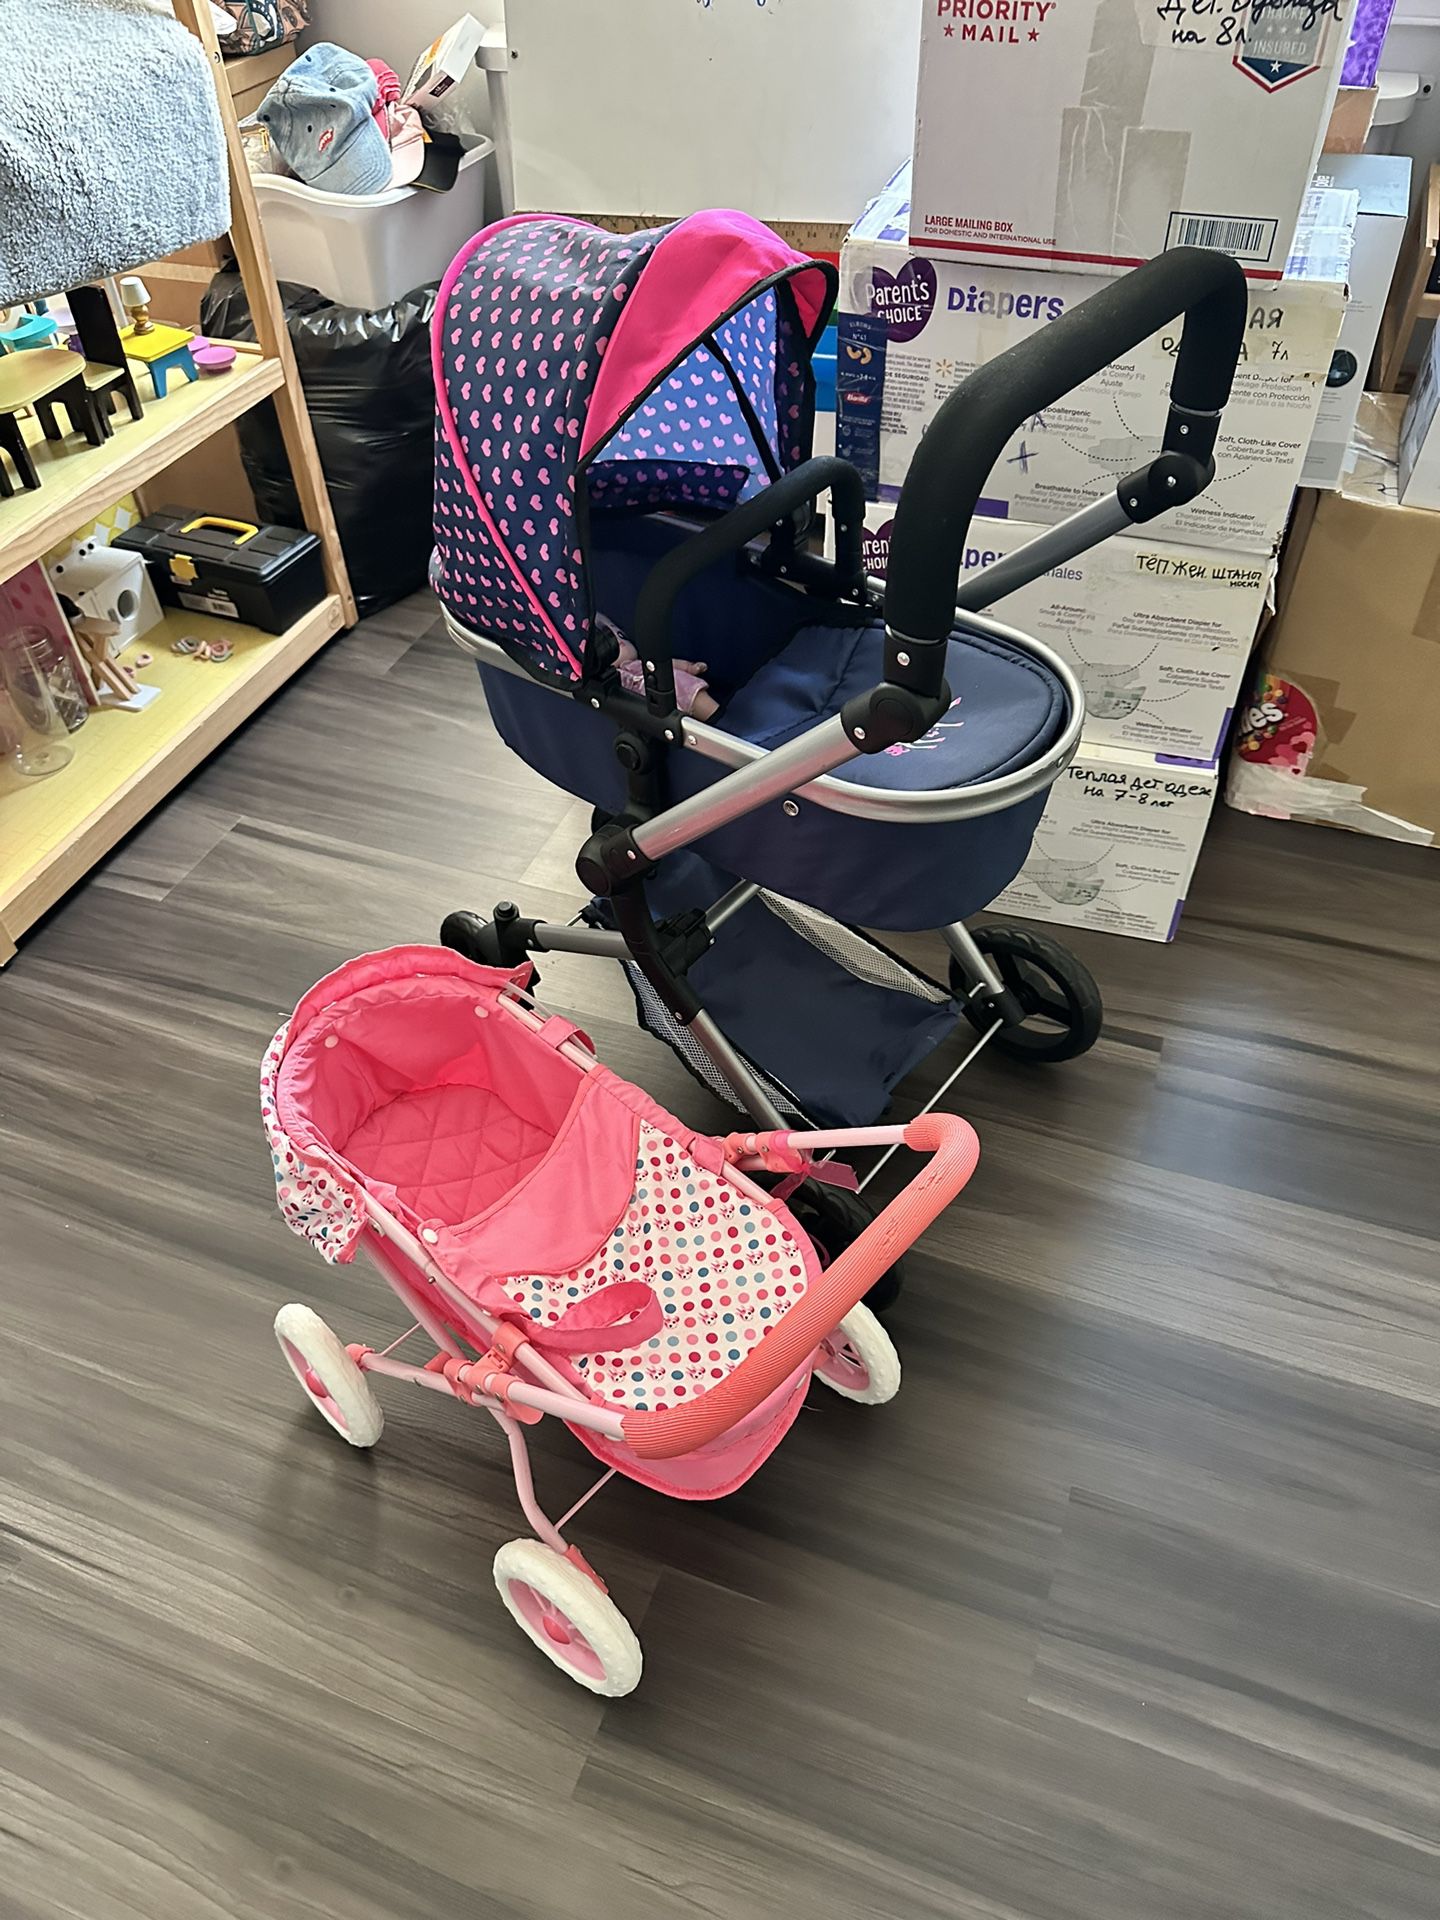 Doll Strollers (toy)